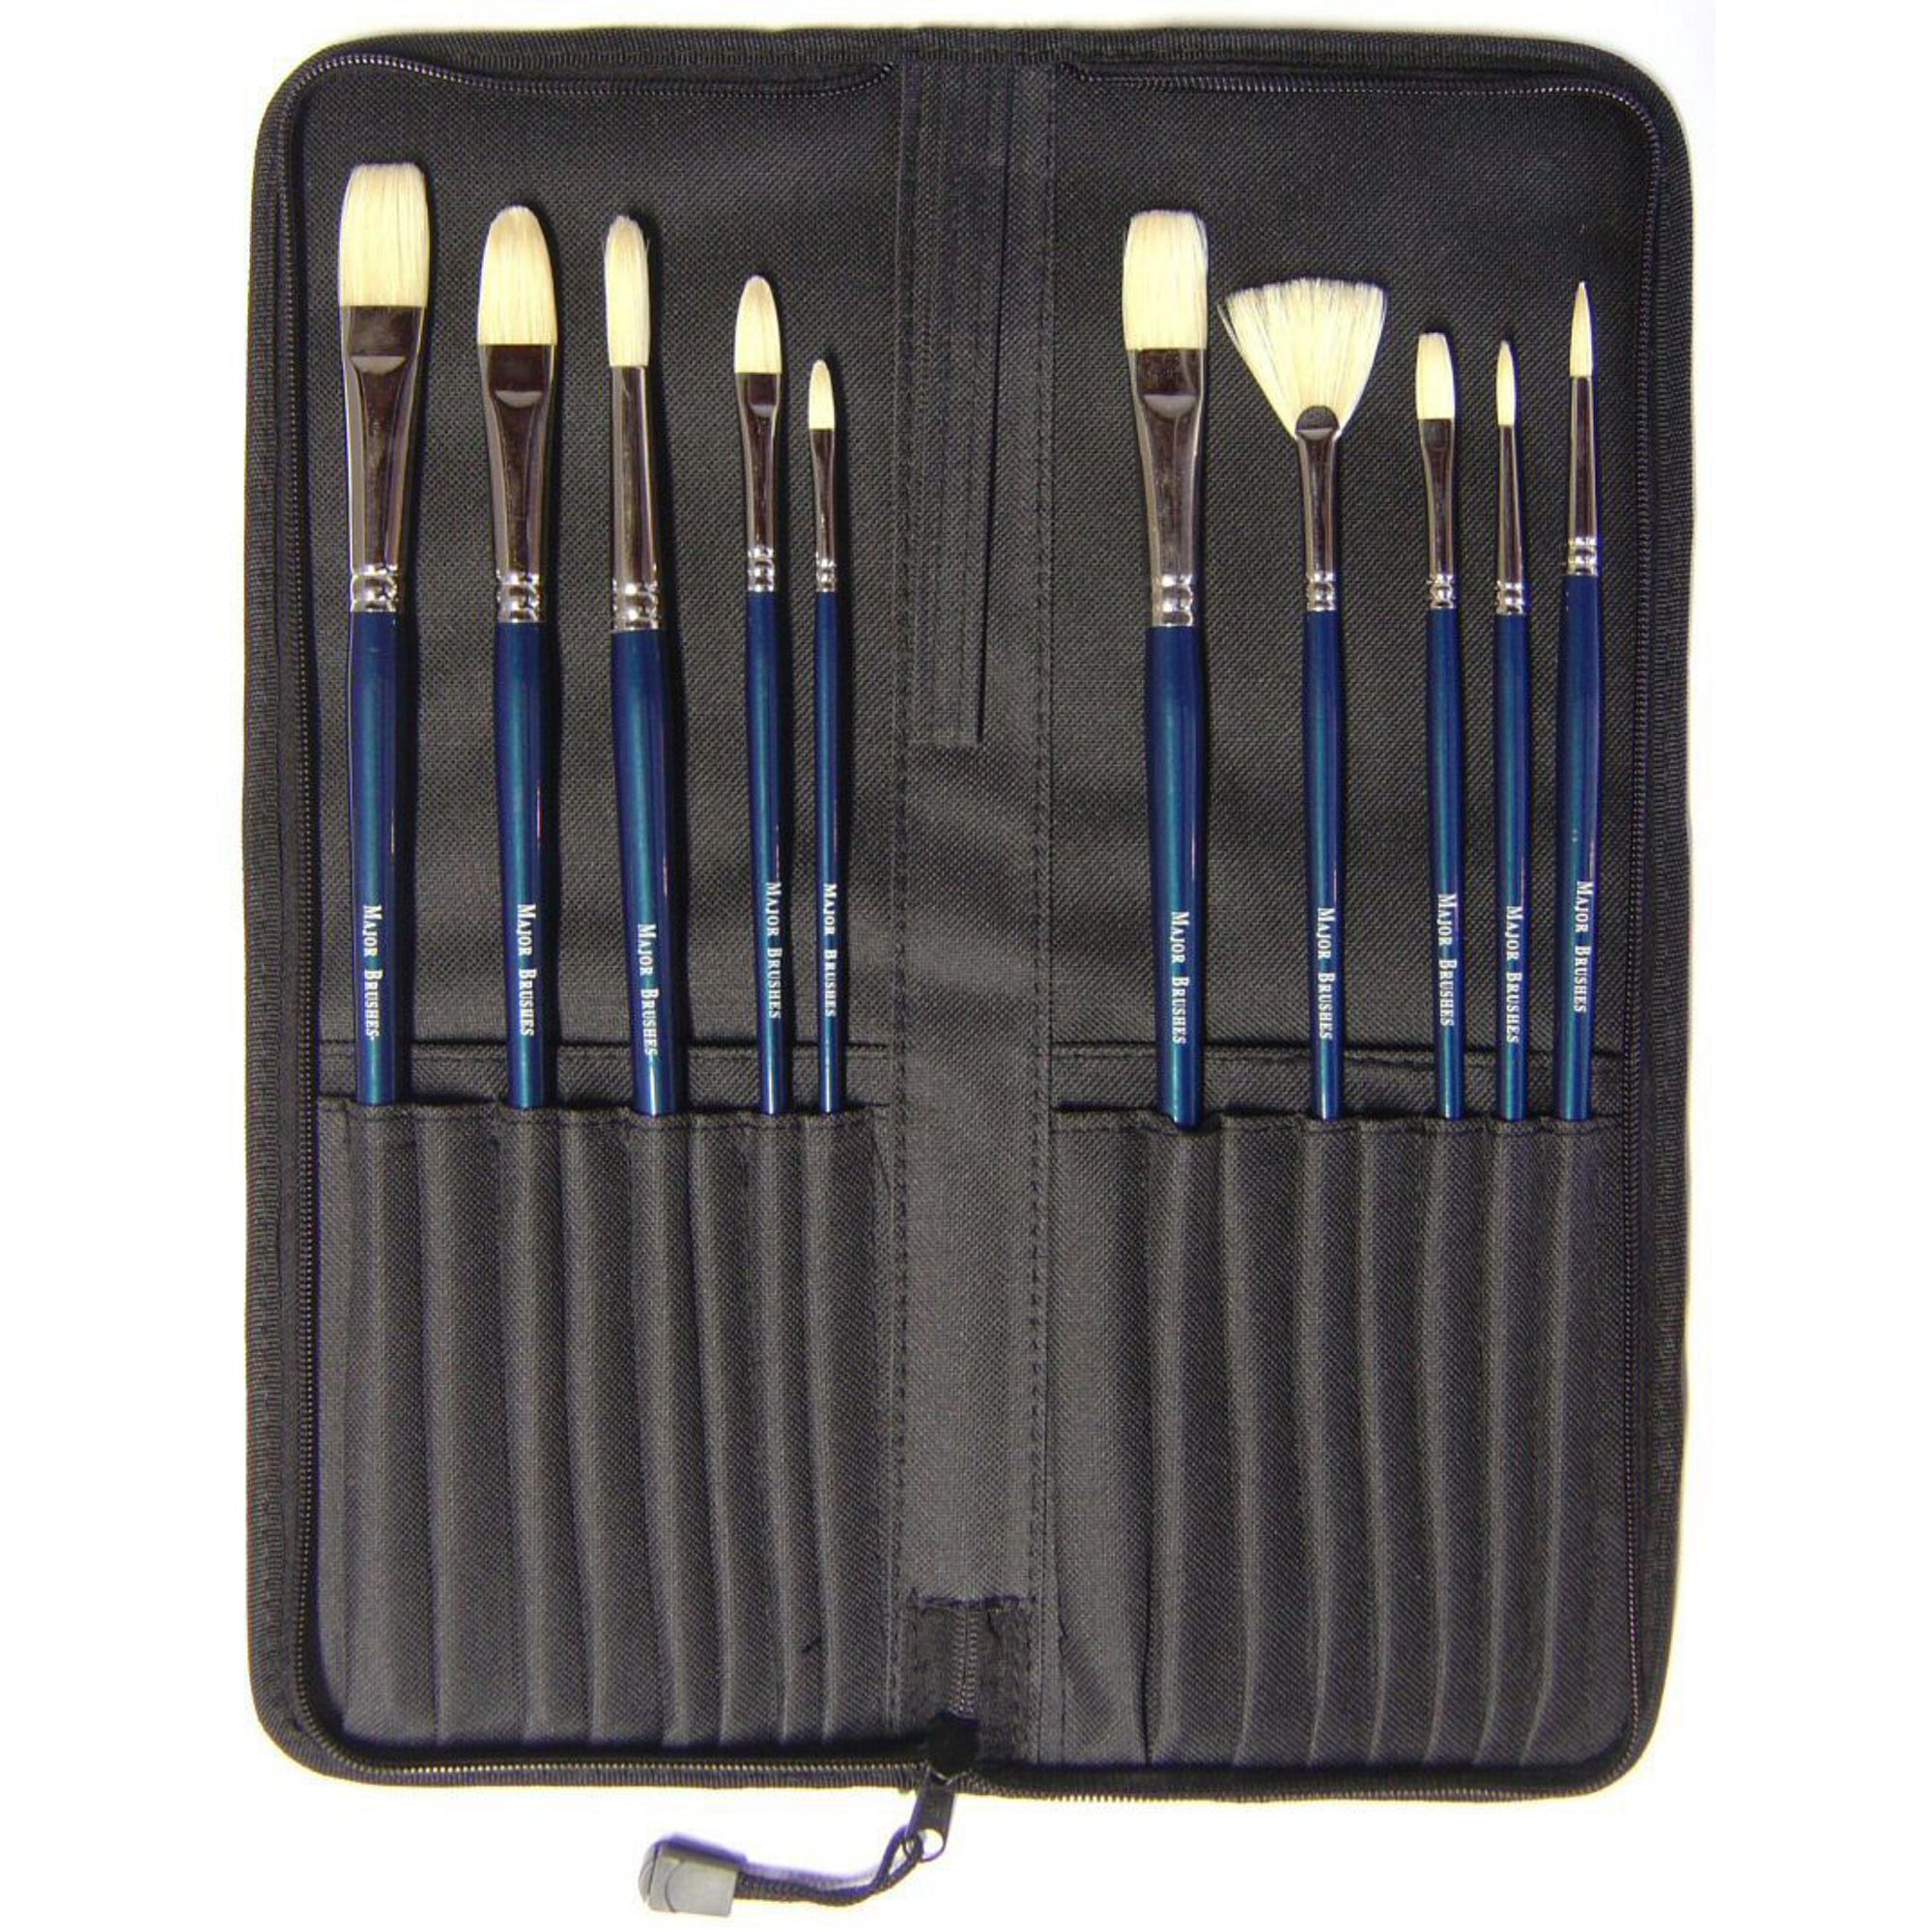 Artists Choice Oil Painting Set 10